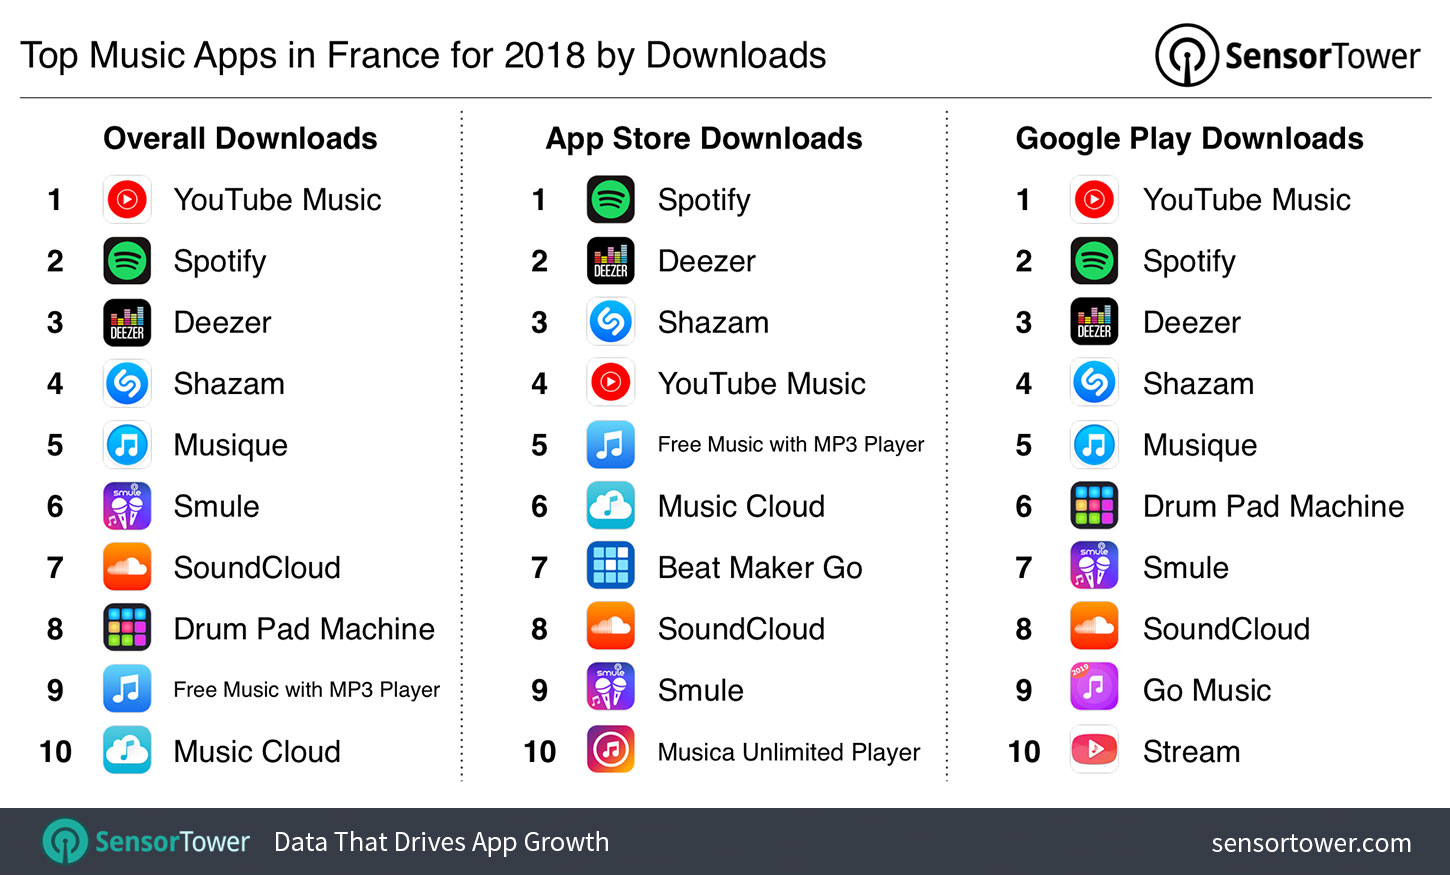 Top Music Apps in France for 2018 by Downloads